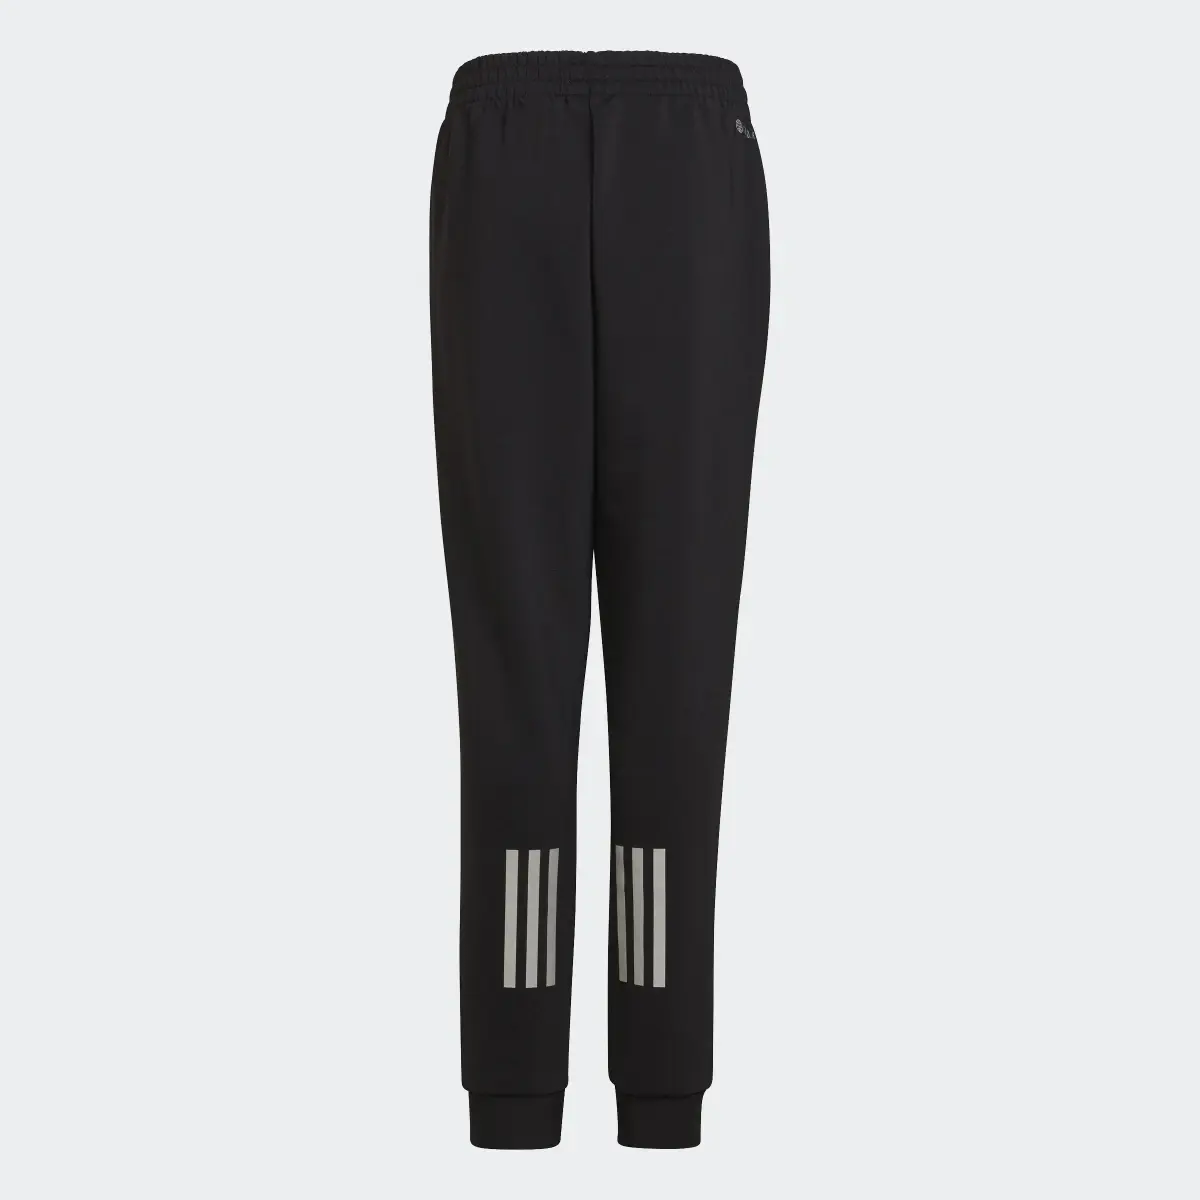 Adidas COLD.RDY Sport Icons Training Joggers. 2